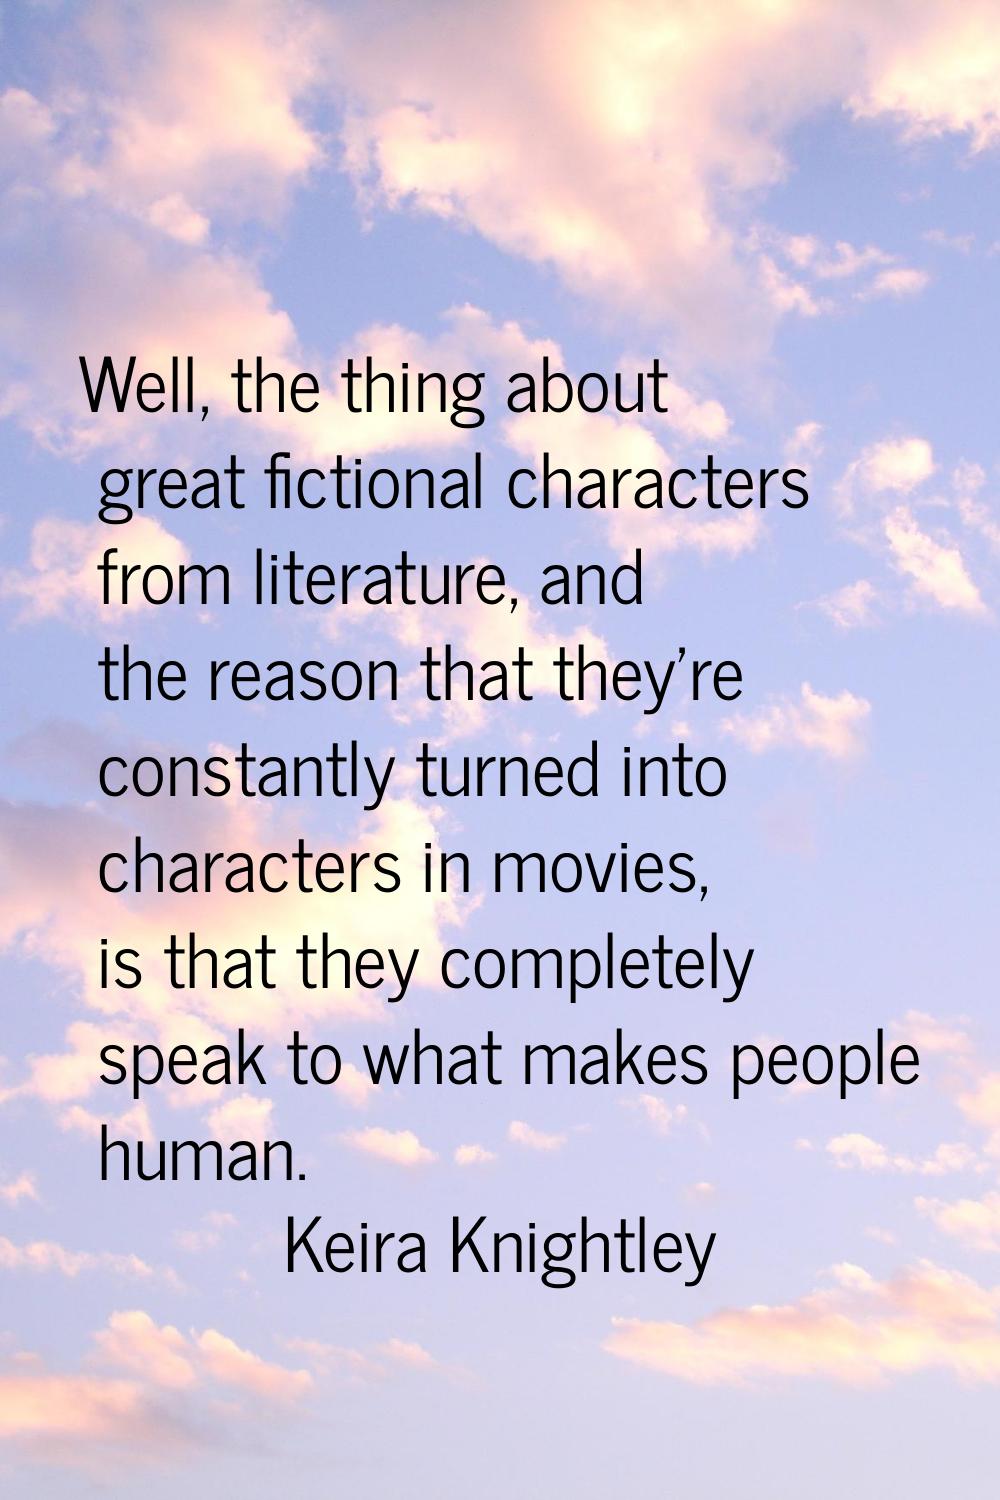 Well, the thing about great fictional characters from literature, and the reason that they're const